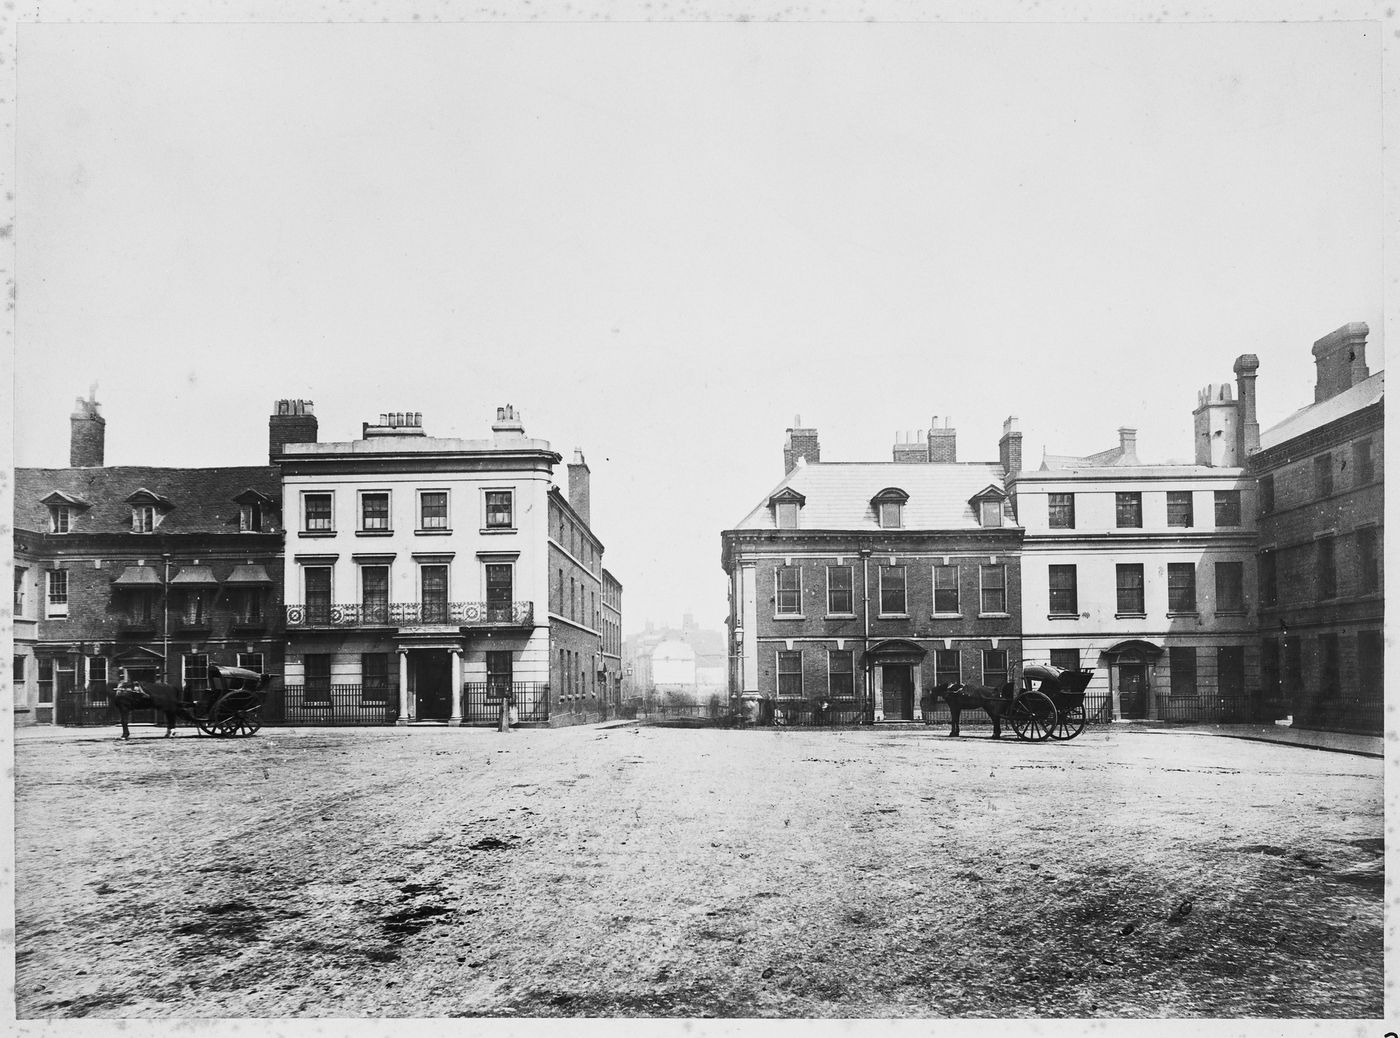 View of Old Square and Lichfield Street, Birmingham, England